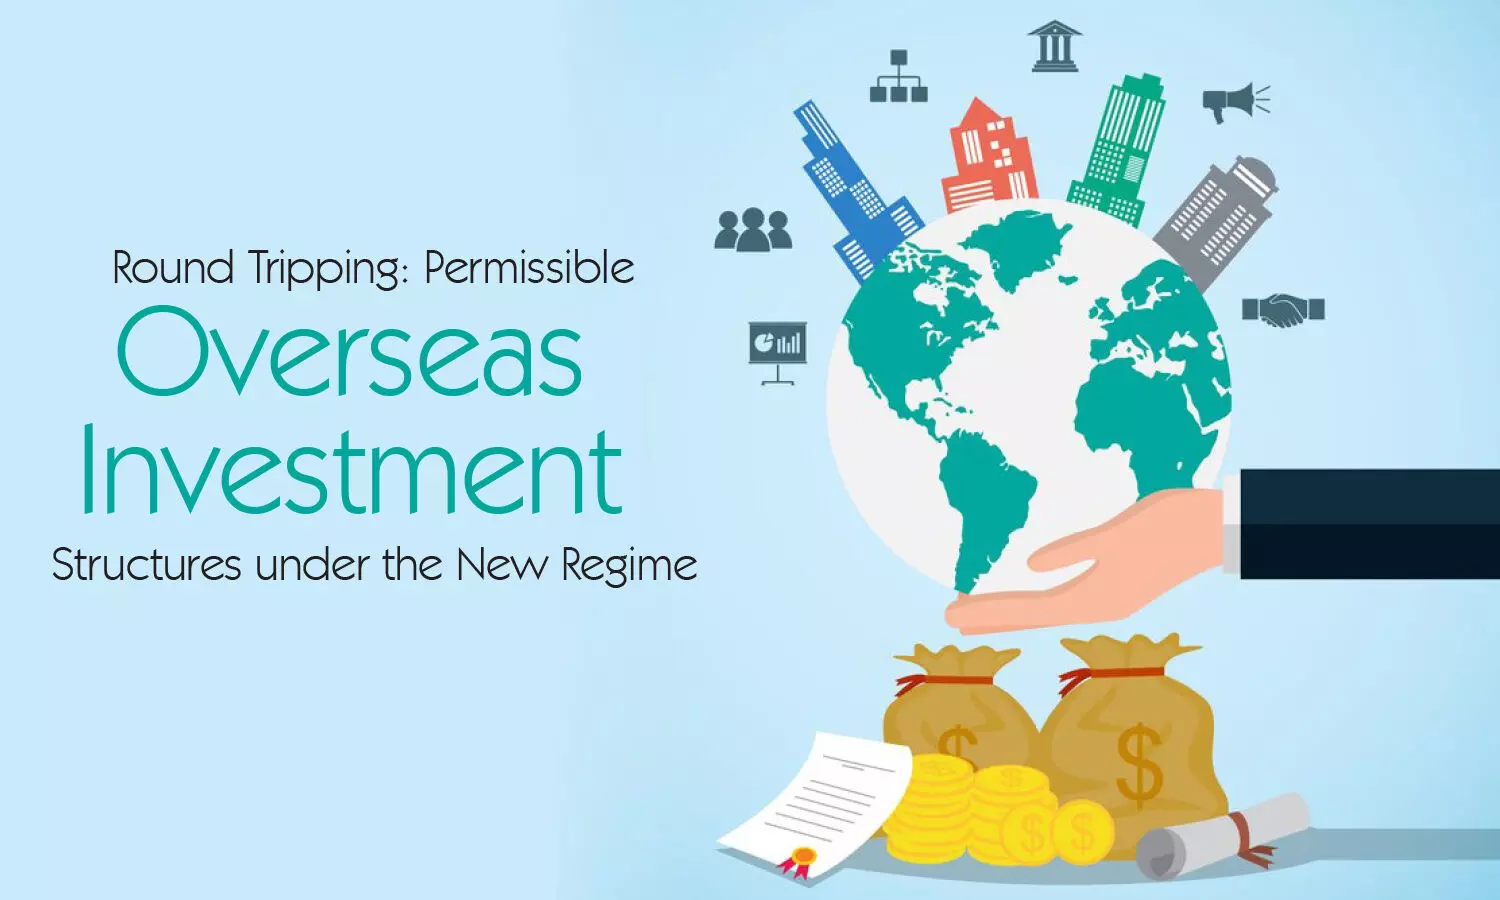 Round Tripping: Permissible Overseas Investment Structures Under the New Regime